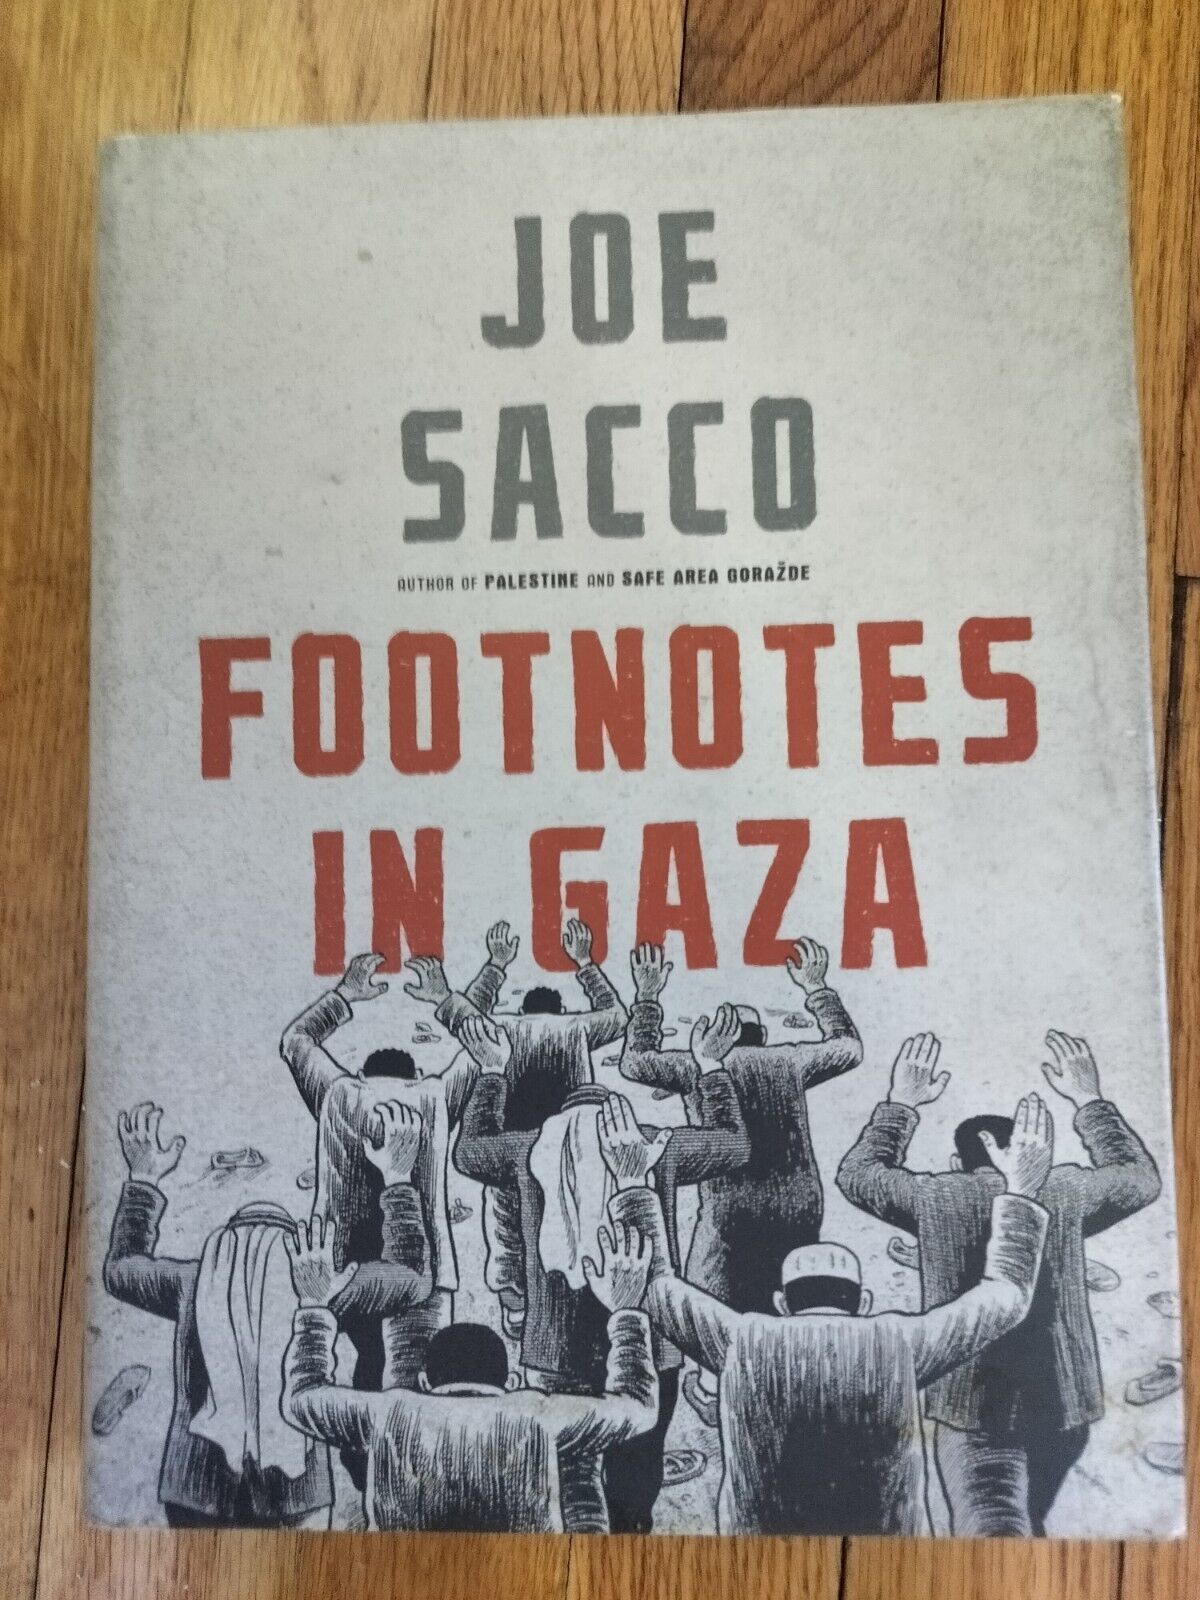 HARDCOVER RARE Footnotes In Gaza by Joe Sacco - Excellent Condition